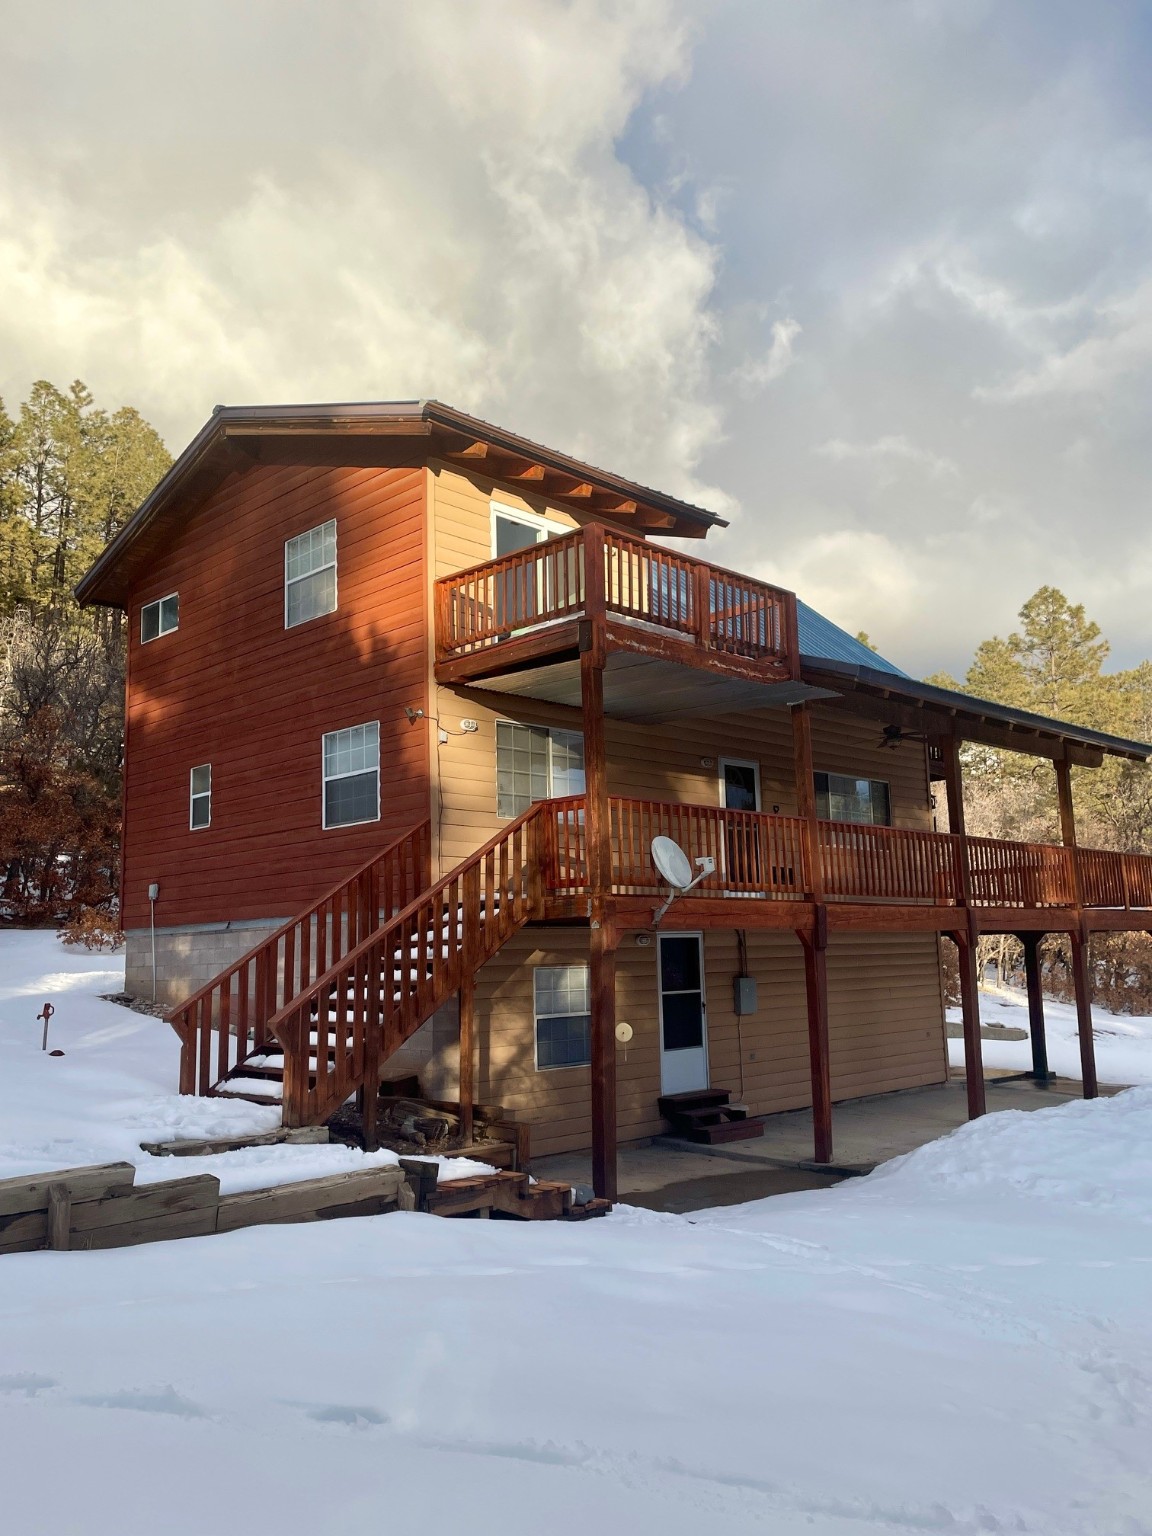 38 Private Drive 1754A, Chama, New Mexico 87520, 2 Bedrooms Bedrooms, ,2 BathroomsBathrooms,Residential,For Sale,38 Private Drive 1754A,202400241